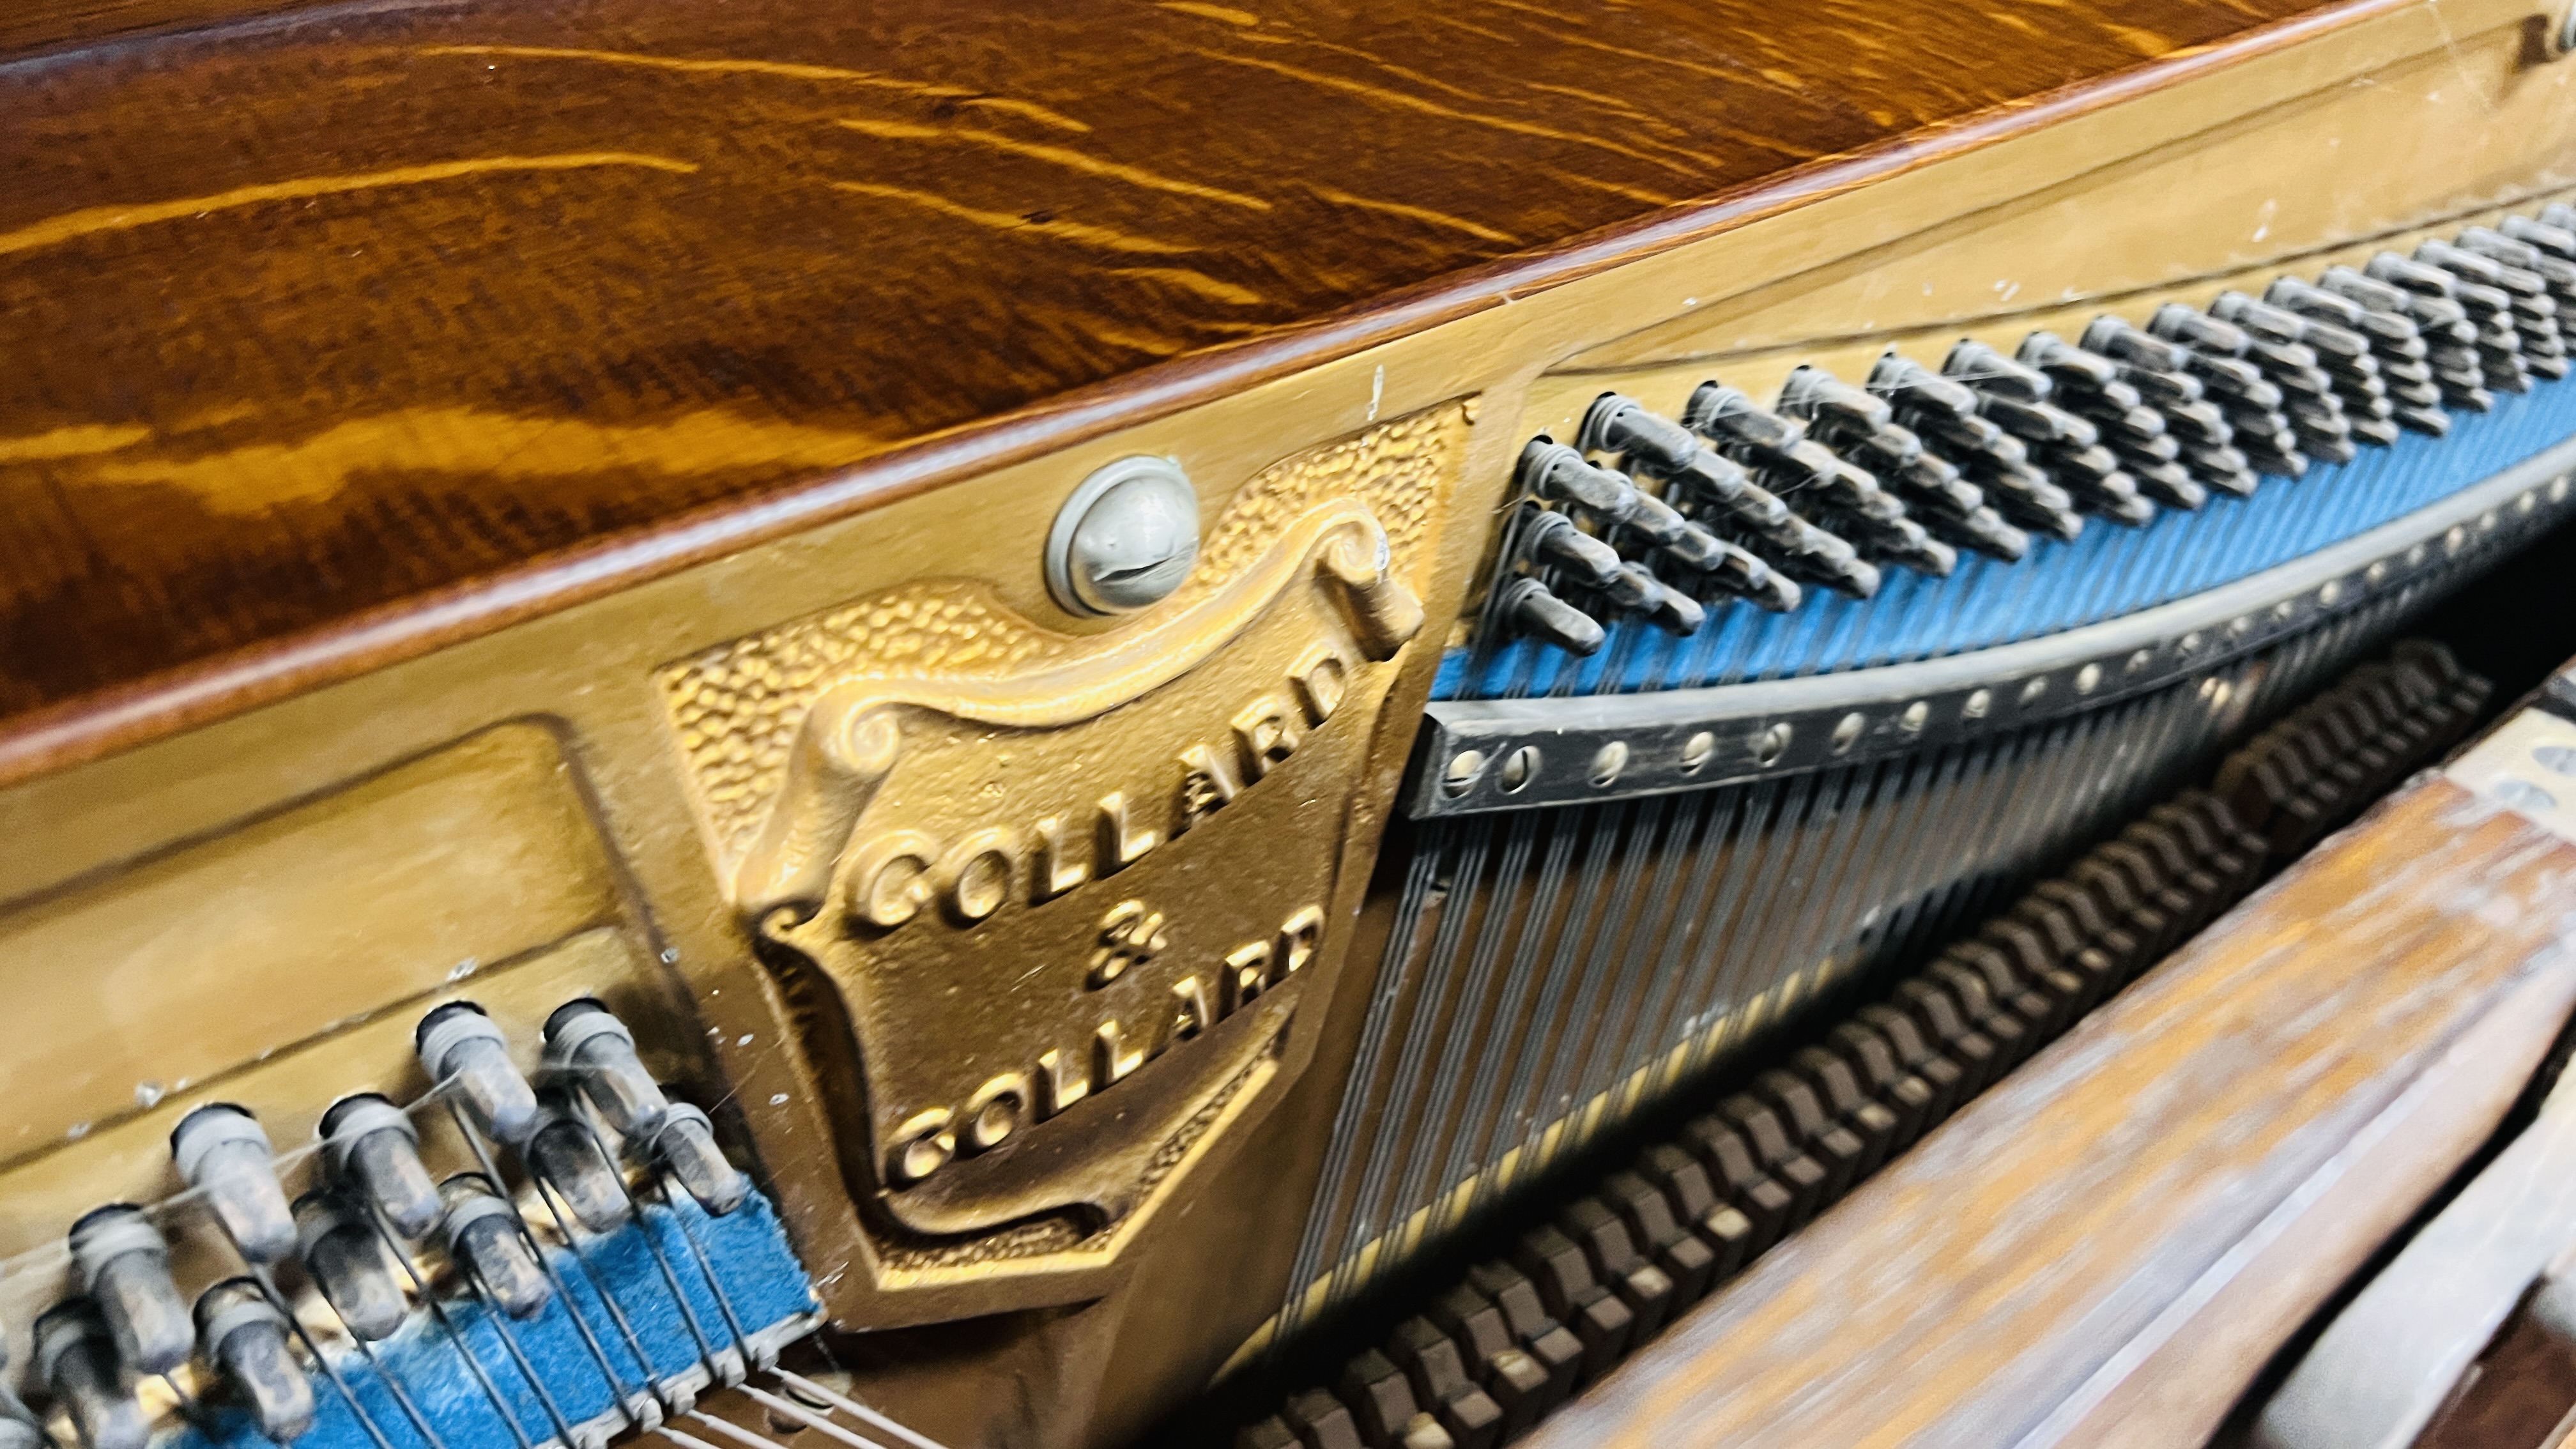 A VINTAGE OAK ARTS AND CRAFTS PIANO WITH ORIGINAL MAKERS LABEL COLLARD & COLLARD HOLDER BROS. - Image 11 of 12